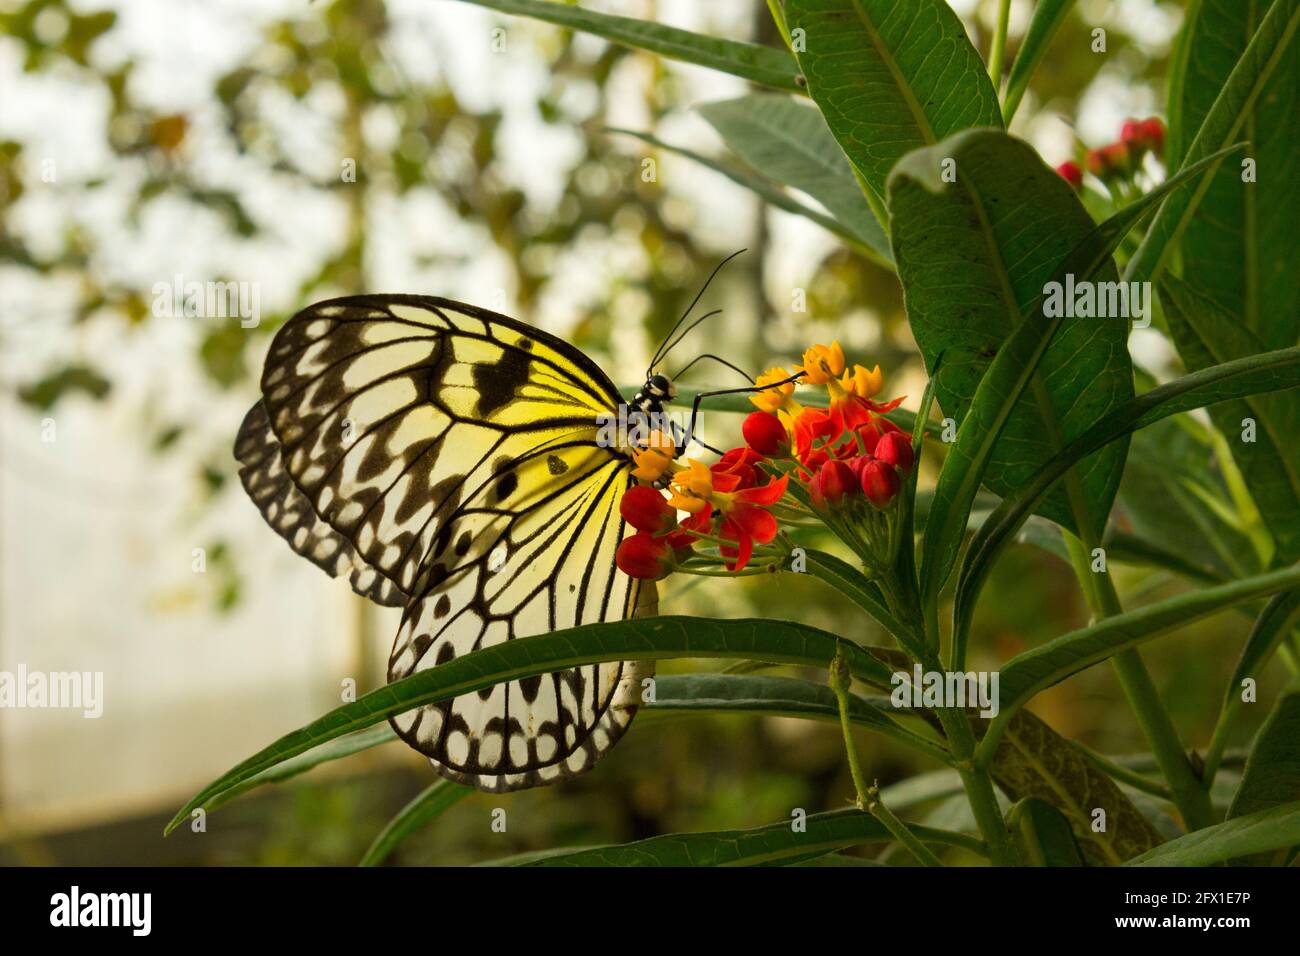 Black & White Tree Nymph butterfly Idea leuconoe, folded wings on red flowers collecting nectar with leaves and soft focus green/cream background Stock Photo